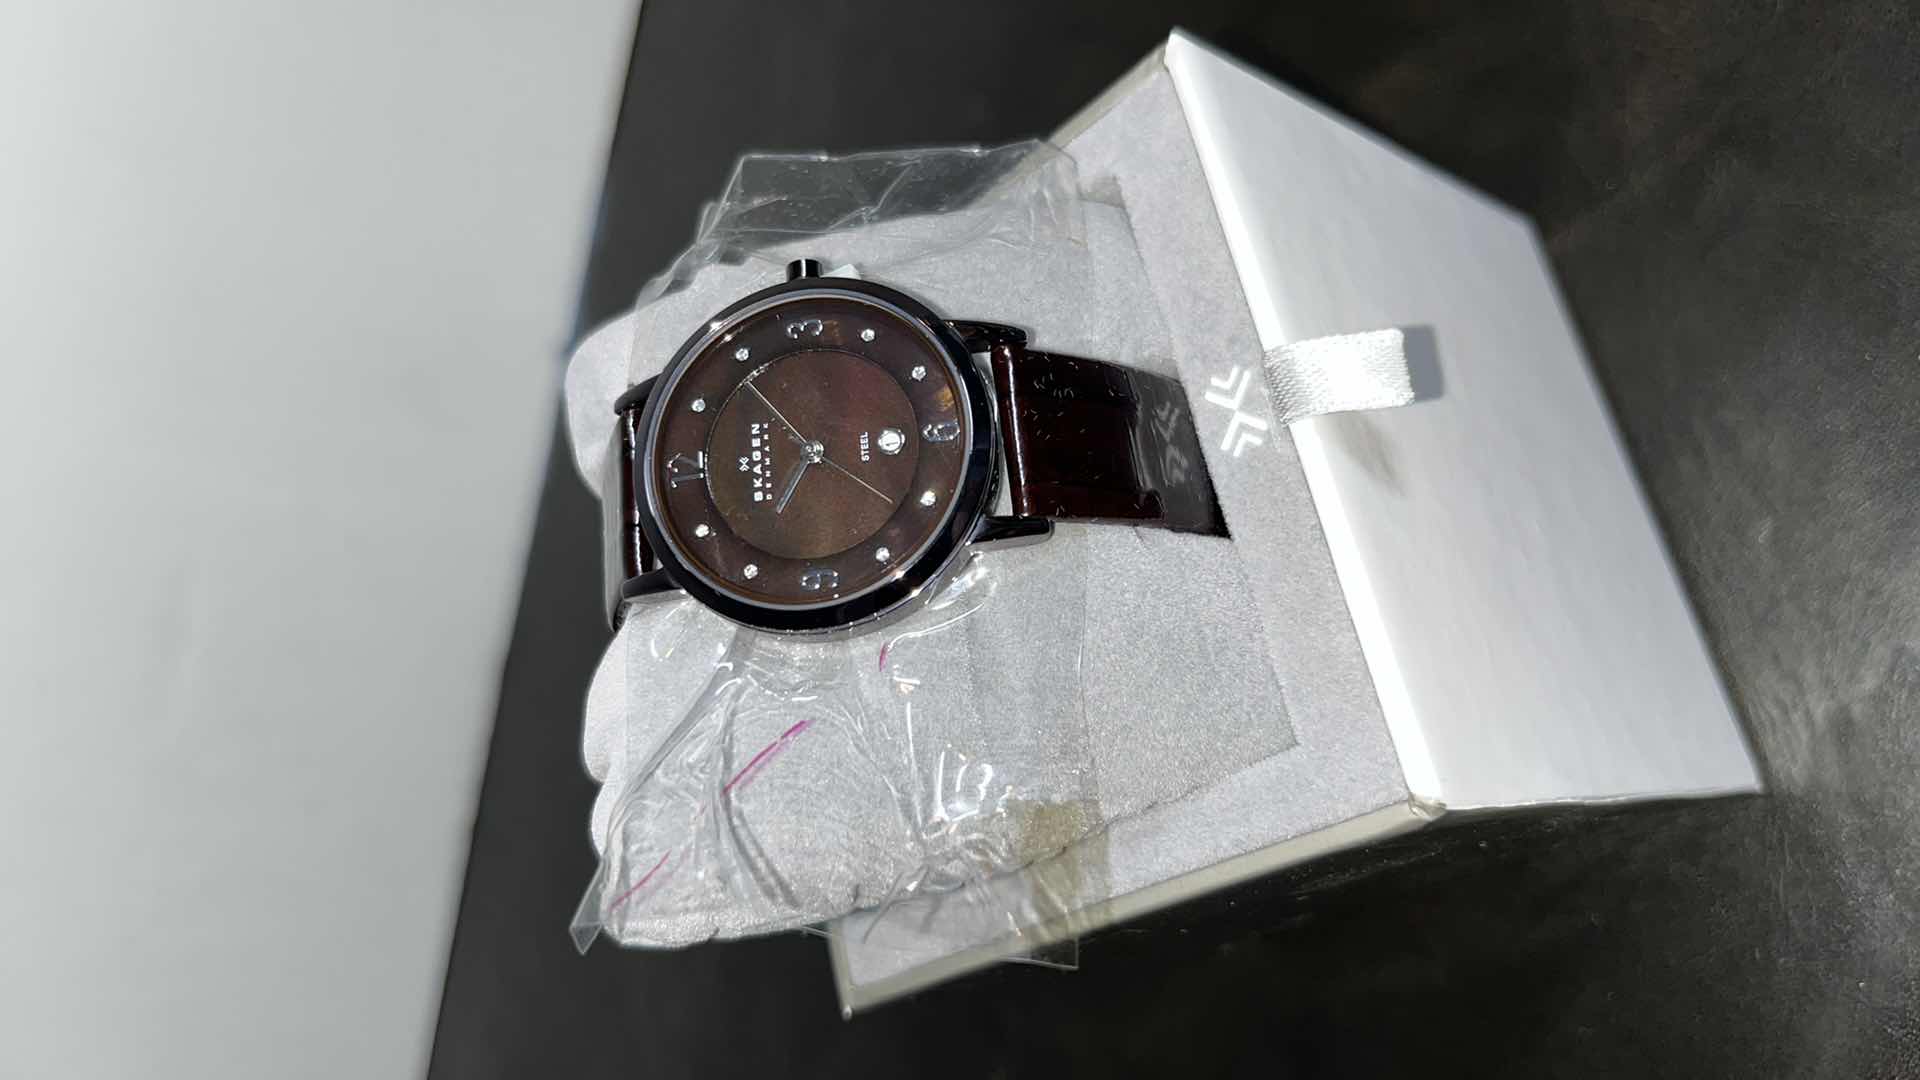 Photo 4 of NEW WOMENS SKAGEN STEEL WATCH W STAINLESS STEEL CASE & GENUINE LEATHER STRAP, PURPLE MOTHER OF PEARL INLAY W SWAROVSKI CRYSTALS, INCLUDES ORIGINAL BOX MODEL 574SDLD8A